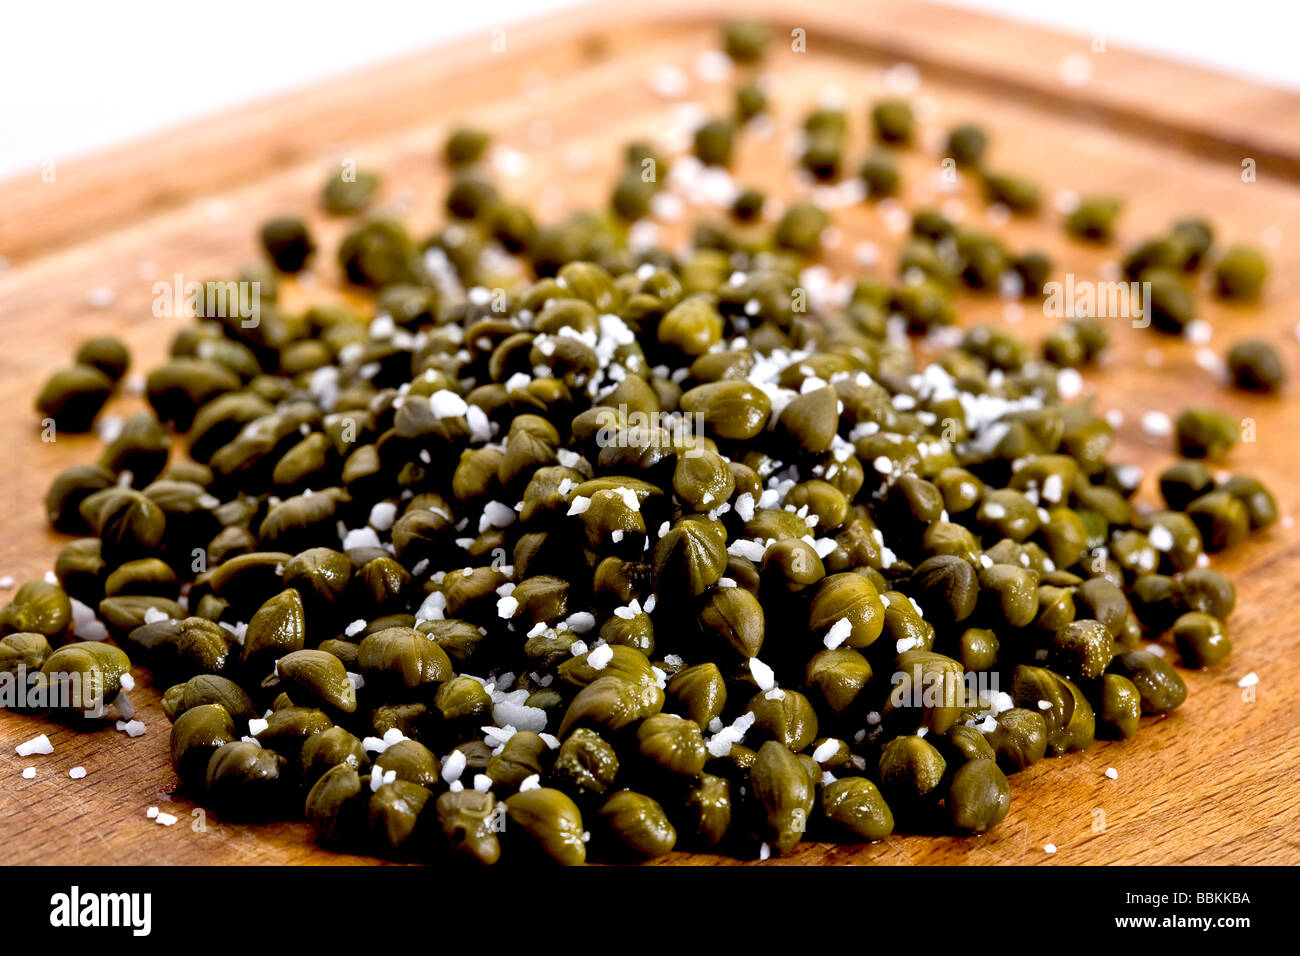 Capers on carving board Stock Photo